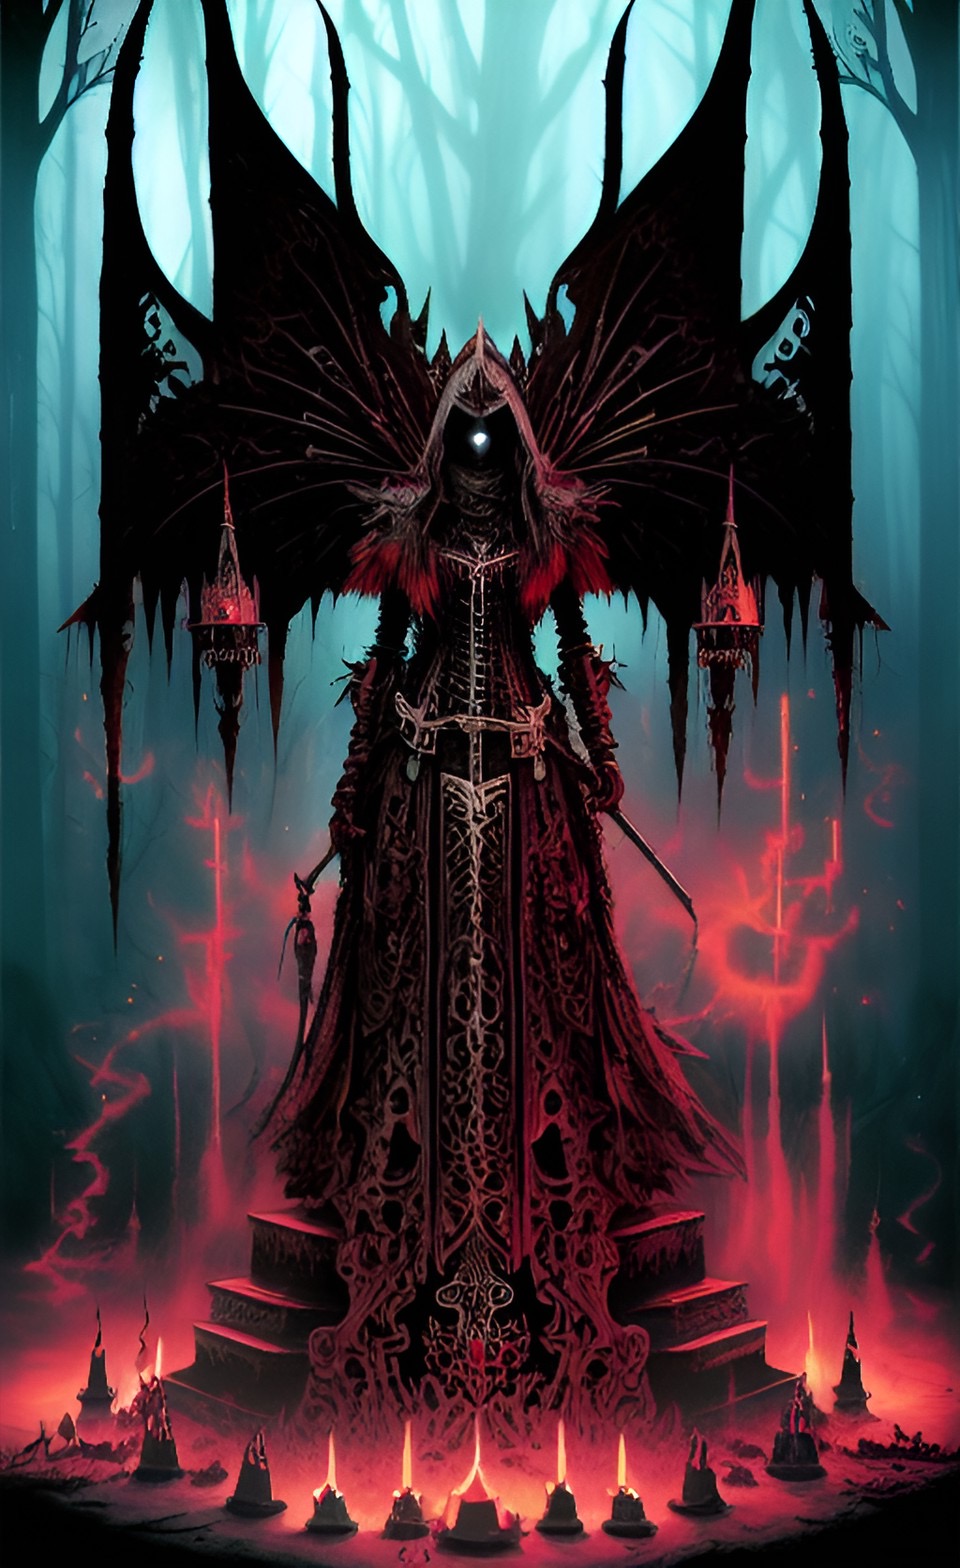 Gothic Priestess by chainsawghoul on DeviantArt